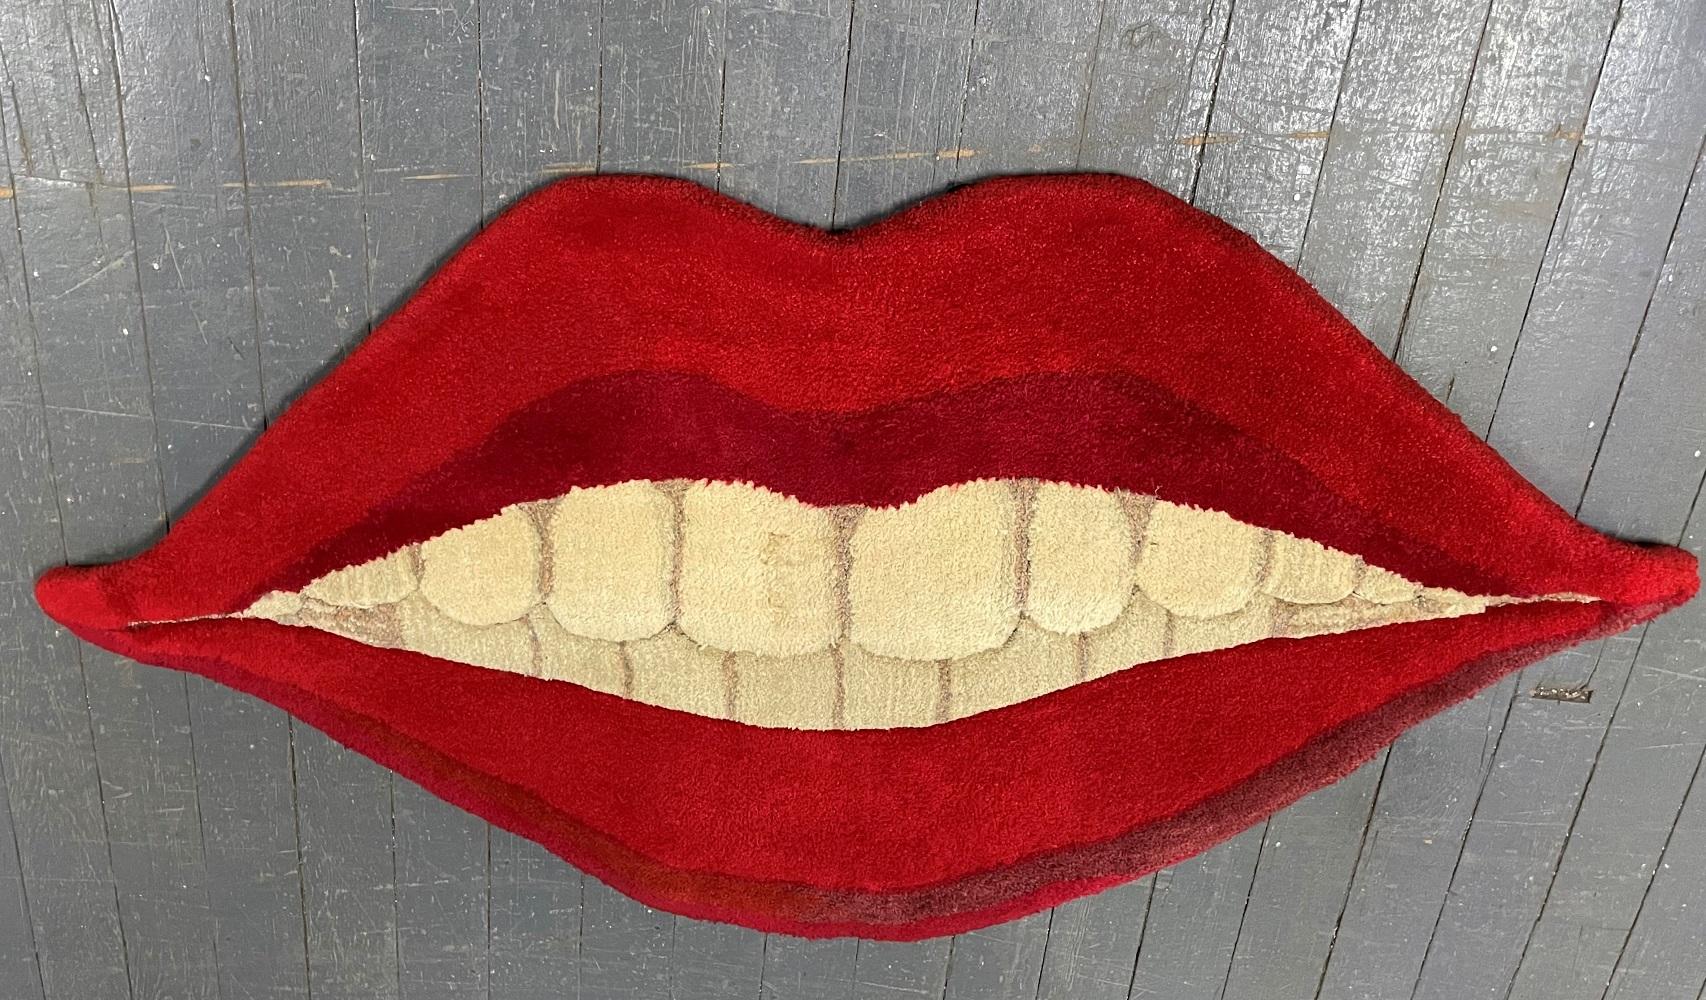 Large 1970s Pop Art Wall Mounted Lips Rug. Pop Art made of wool.  The back has a half wood section with the wire for hanging purposes. 